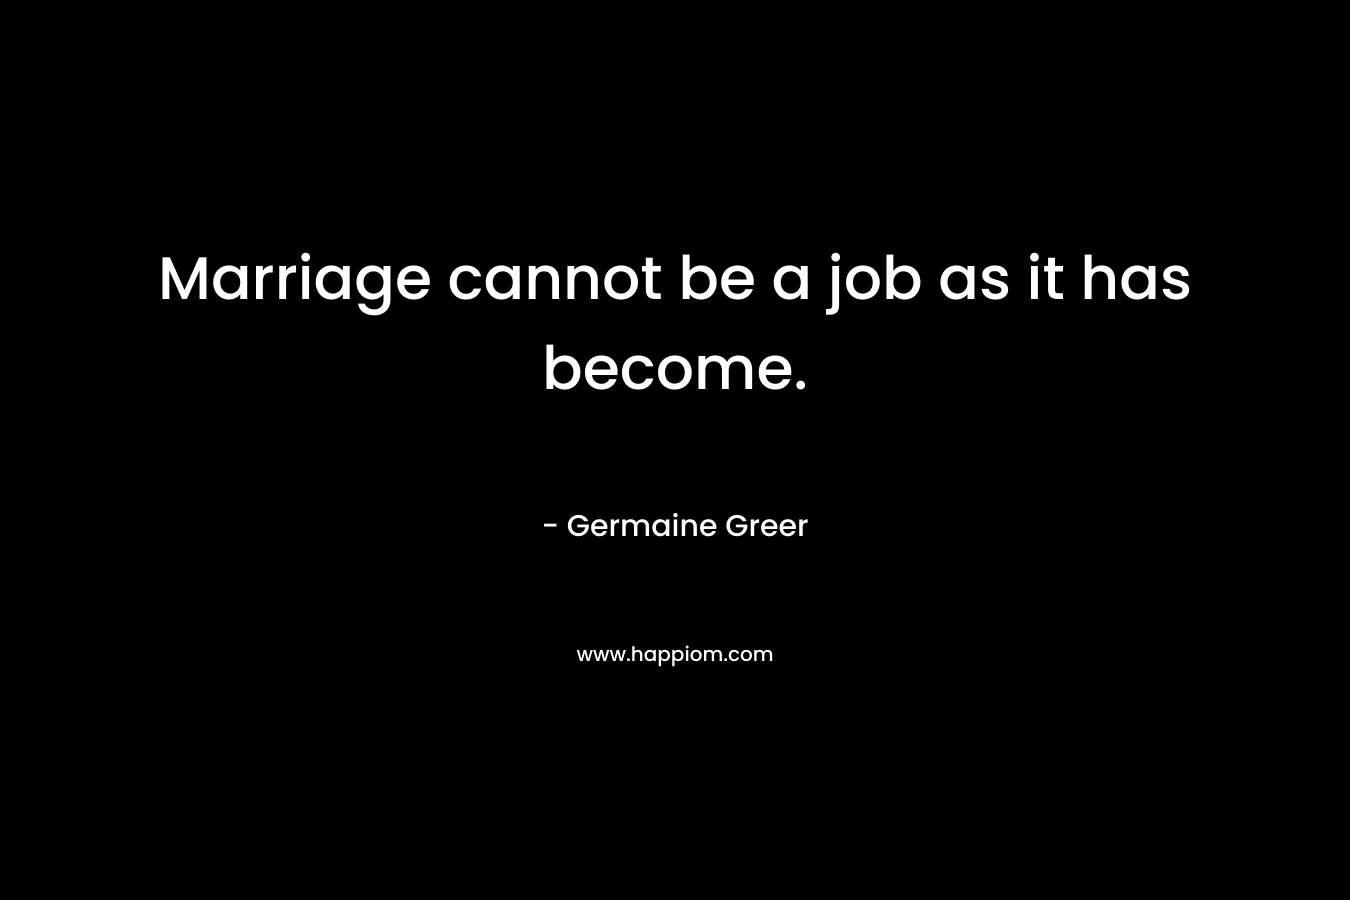 Marriage cannot be a job as it has become. – Germaine Greer